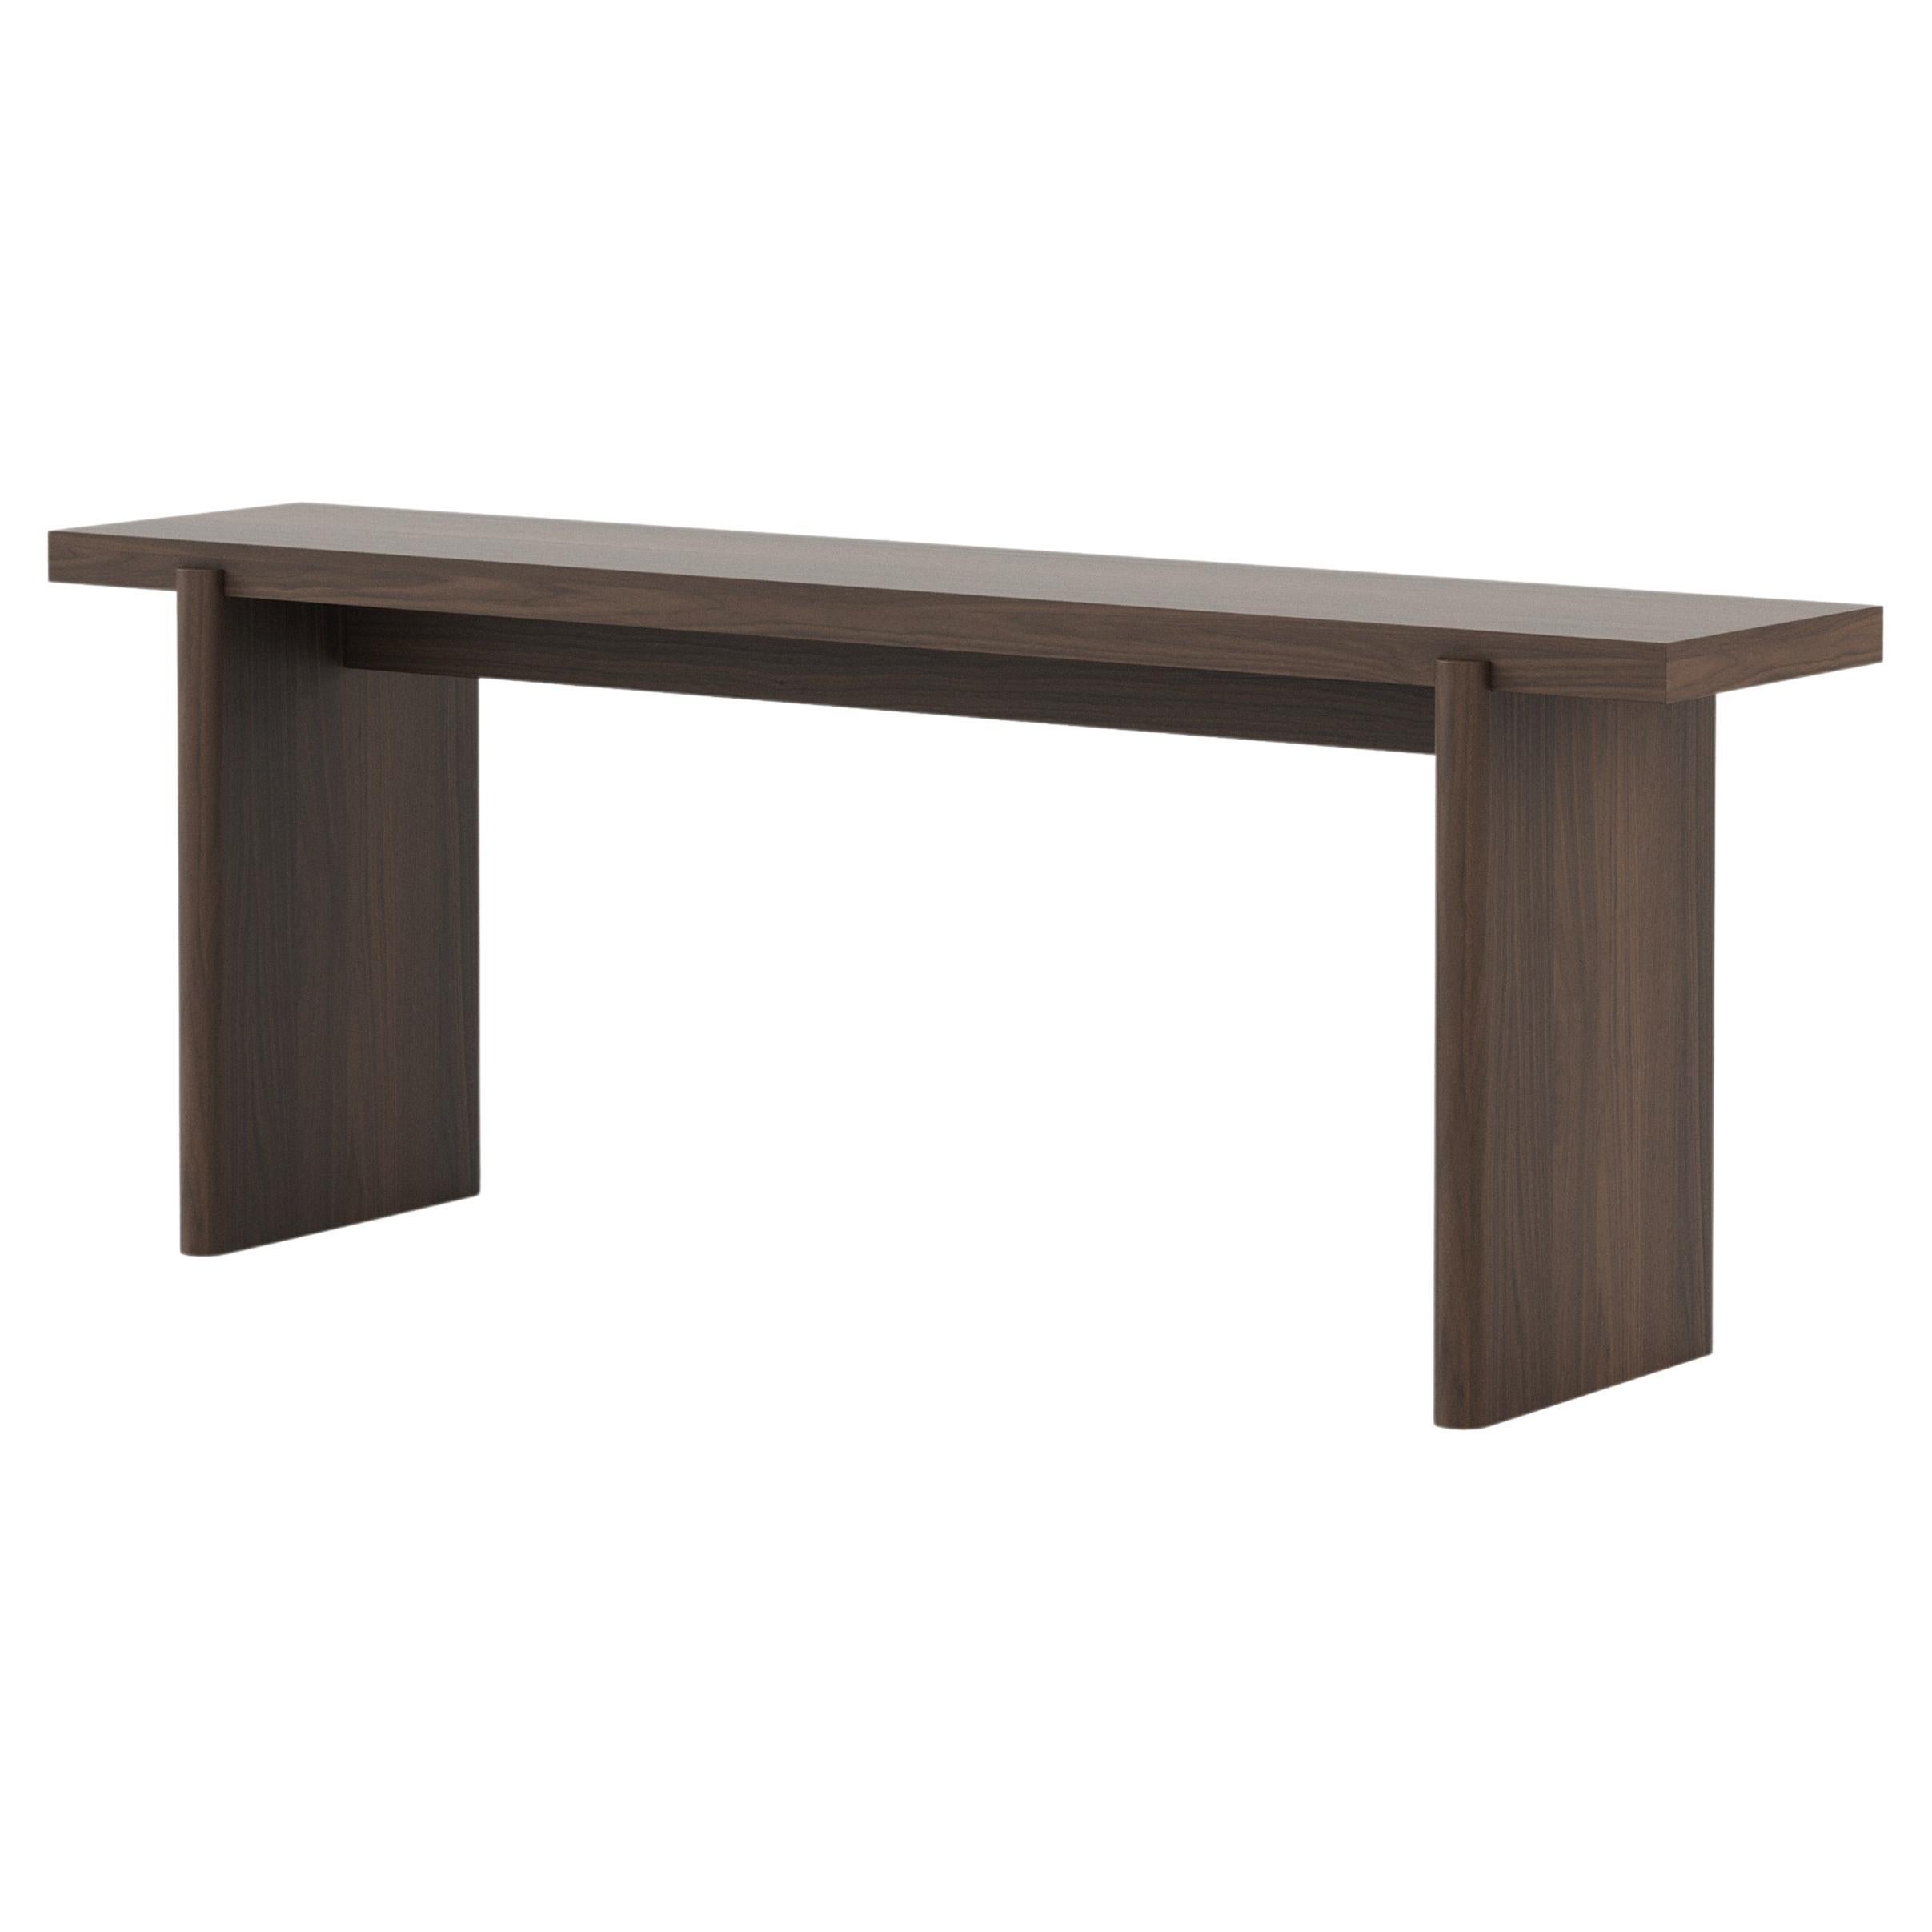 Organic modern style Natur Console made with walnut, Handmade by Stylish Club For Sale